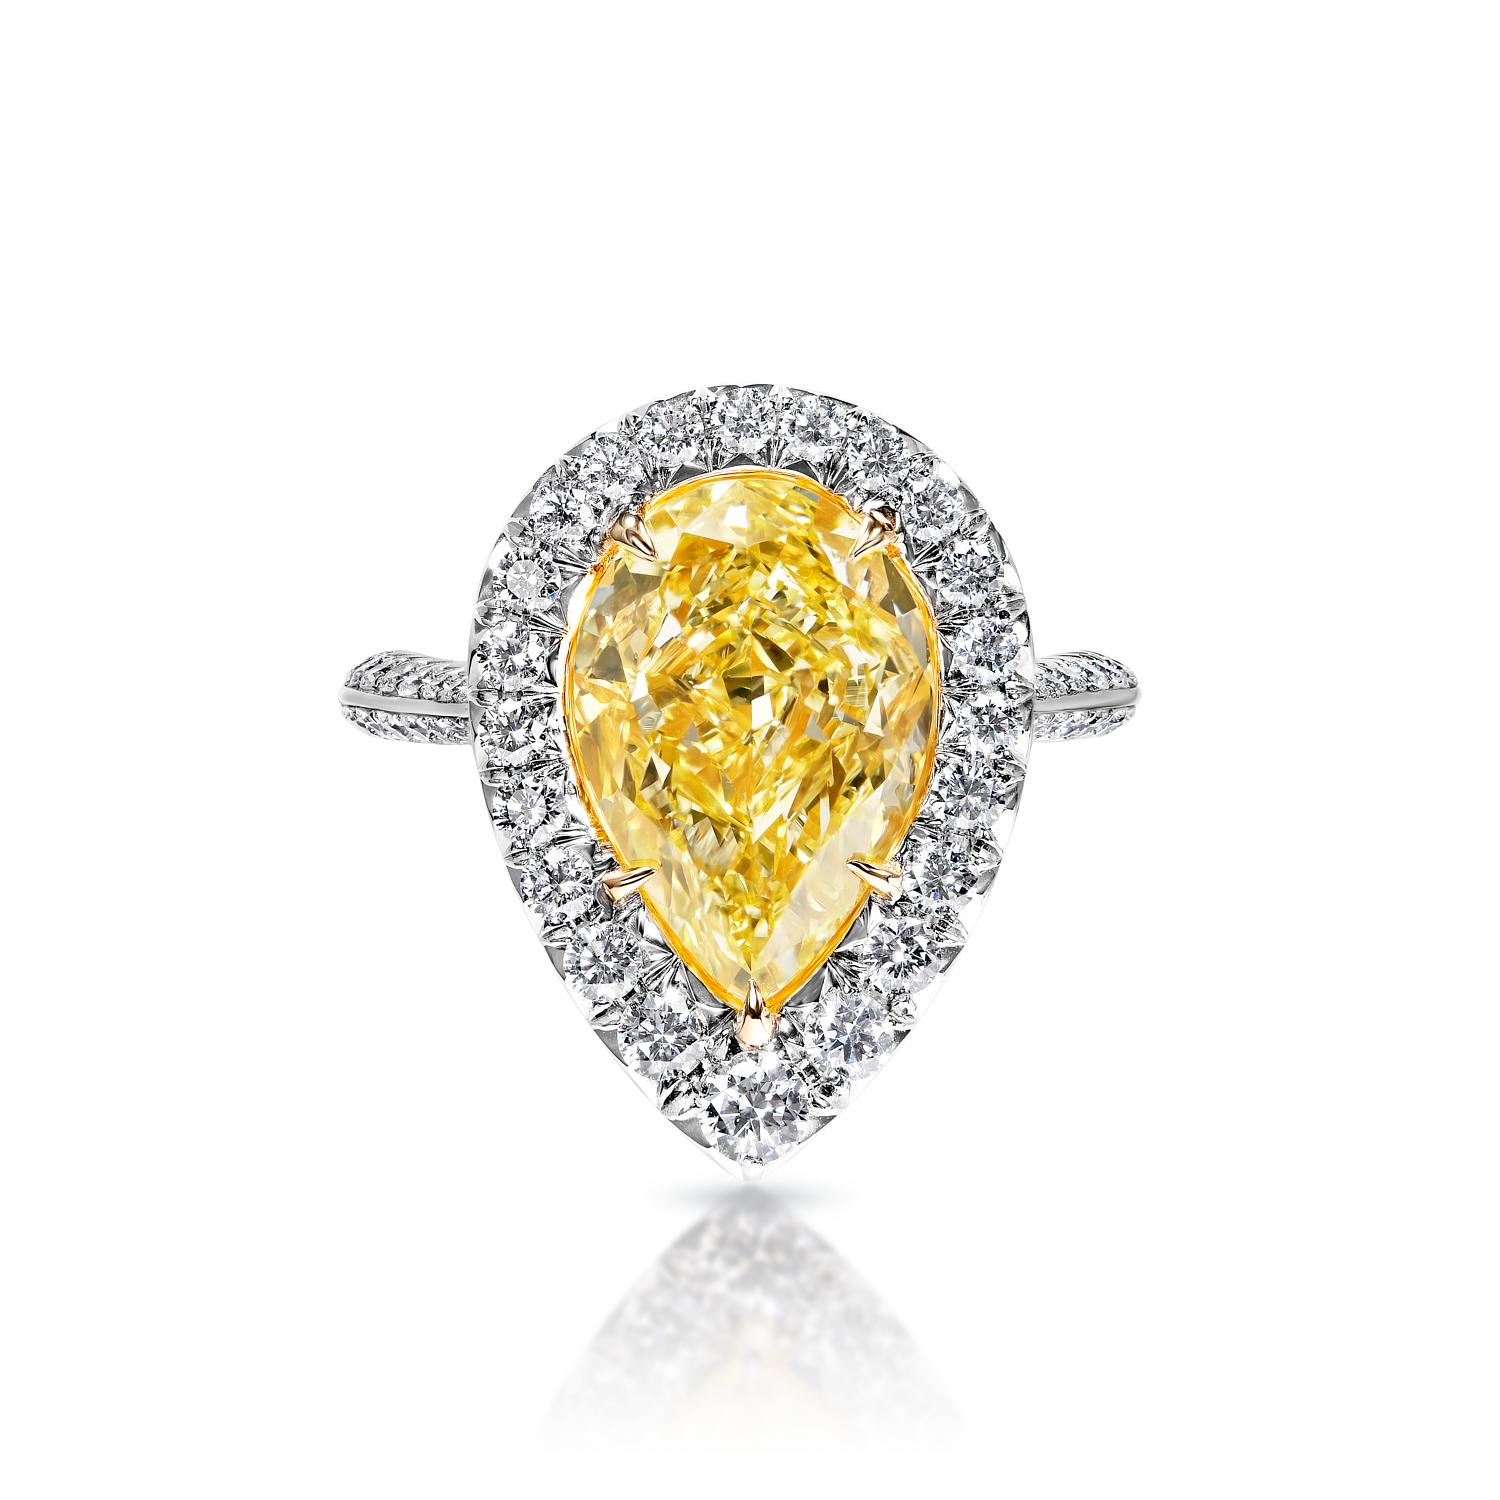 Kendall 5 Carat Fancy Intense Yellow SI1 Pear Shape Diamond Engagement Ring in White Gold. GIA Certified By Mike Nekta

 

GIA CERTIFIED
Center Diamond:

Carat Weight: 5.02 Carats
Color : Fancy Intense Yellow
Clarity: SI1
Style: Pear